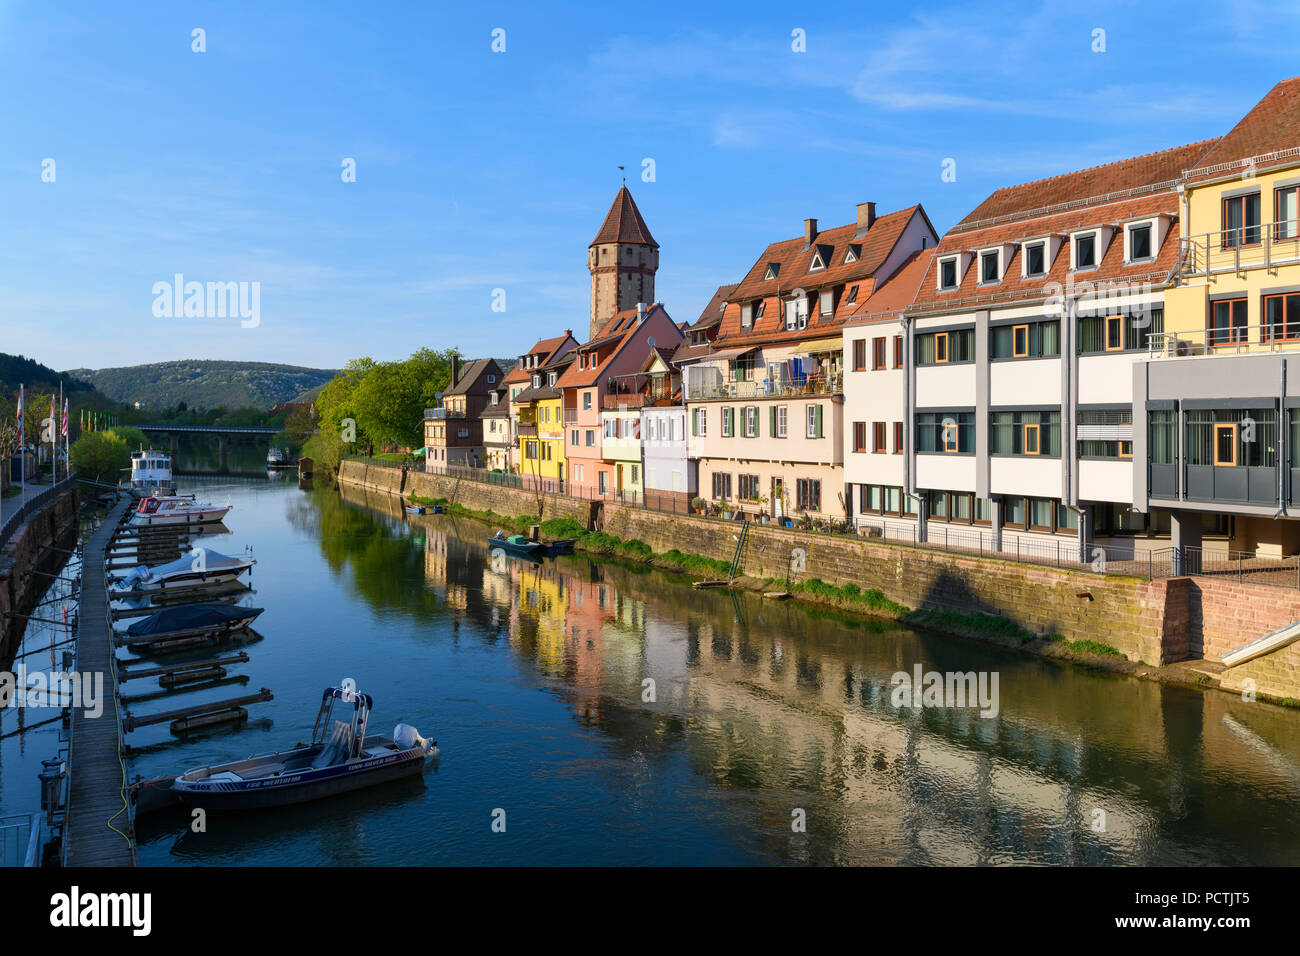 Tauber river with colorful fisher houses and Spitzer tower, Wertheim, River Tauber, Tauberfranken, Spessart, Franconia, Main-Tauber-district, Baden-Württemberg, Germany Stock Photo